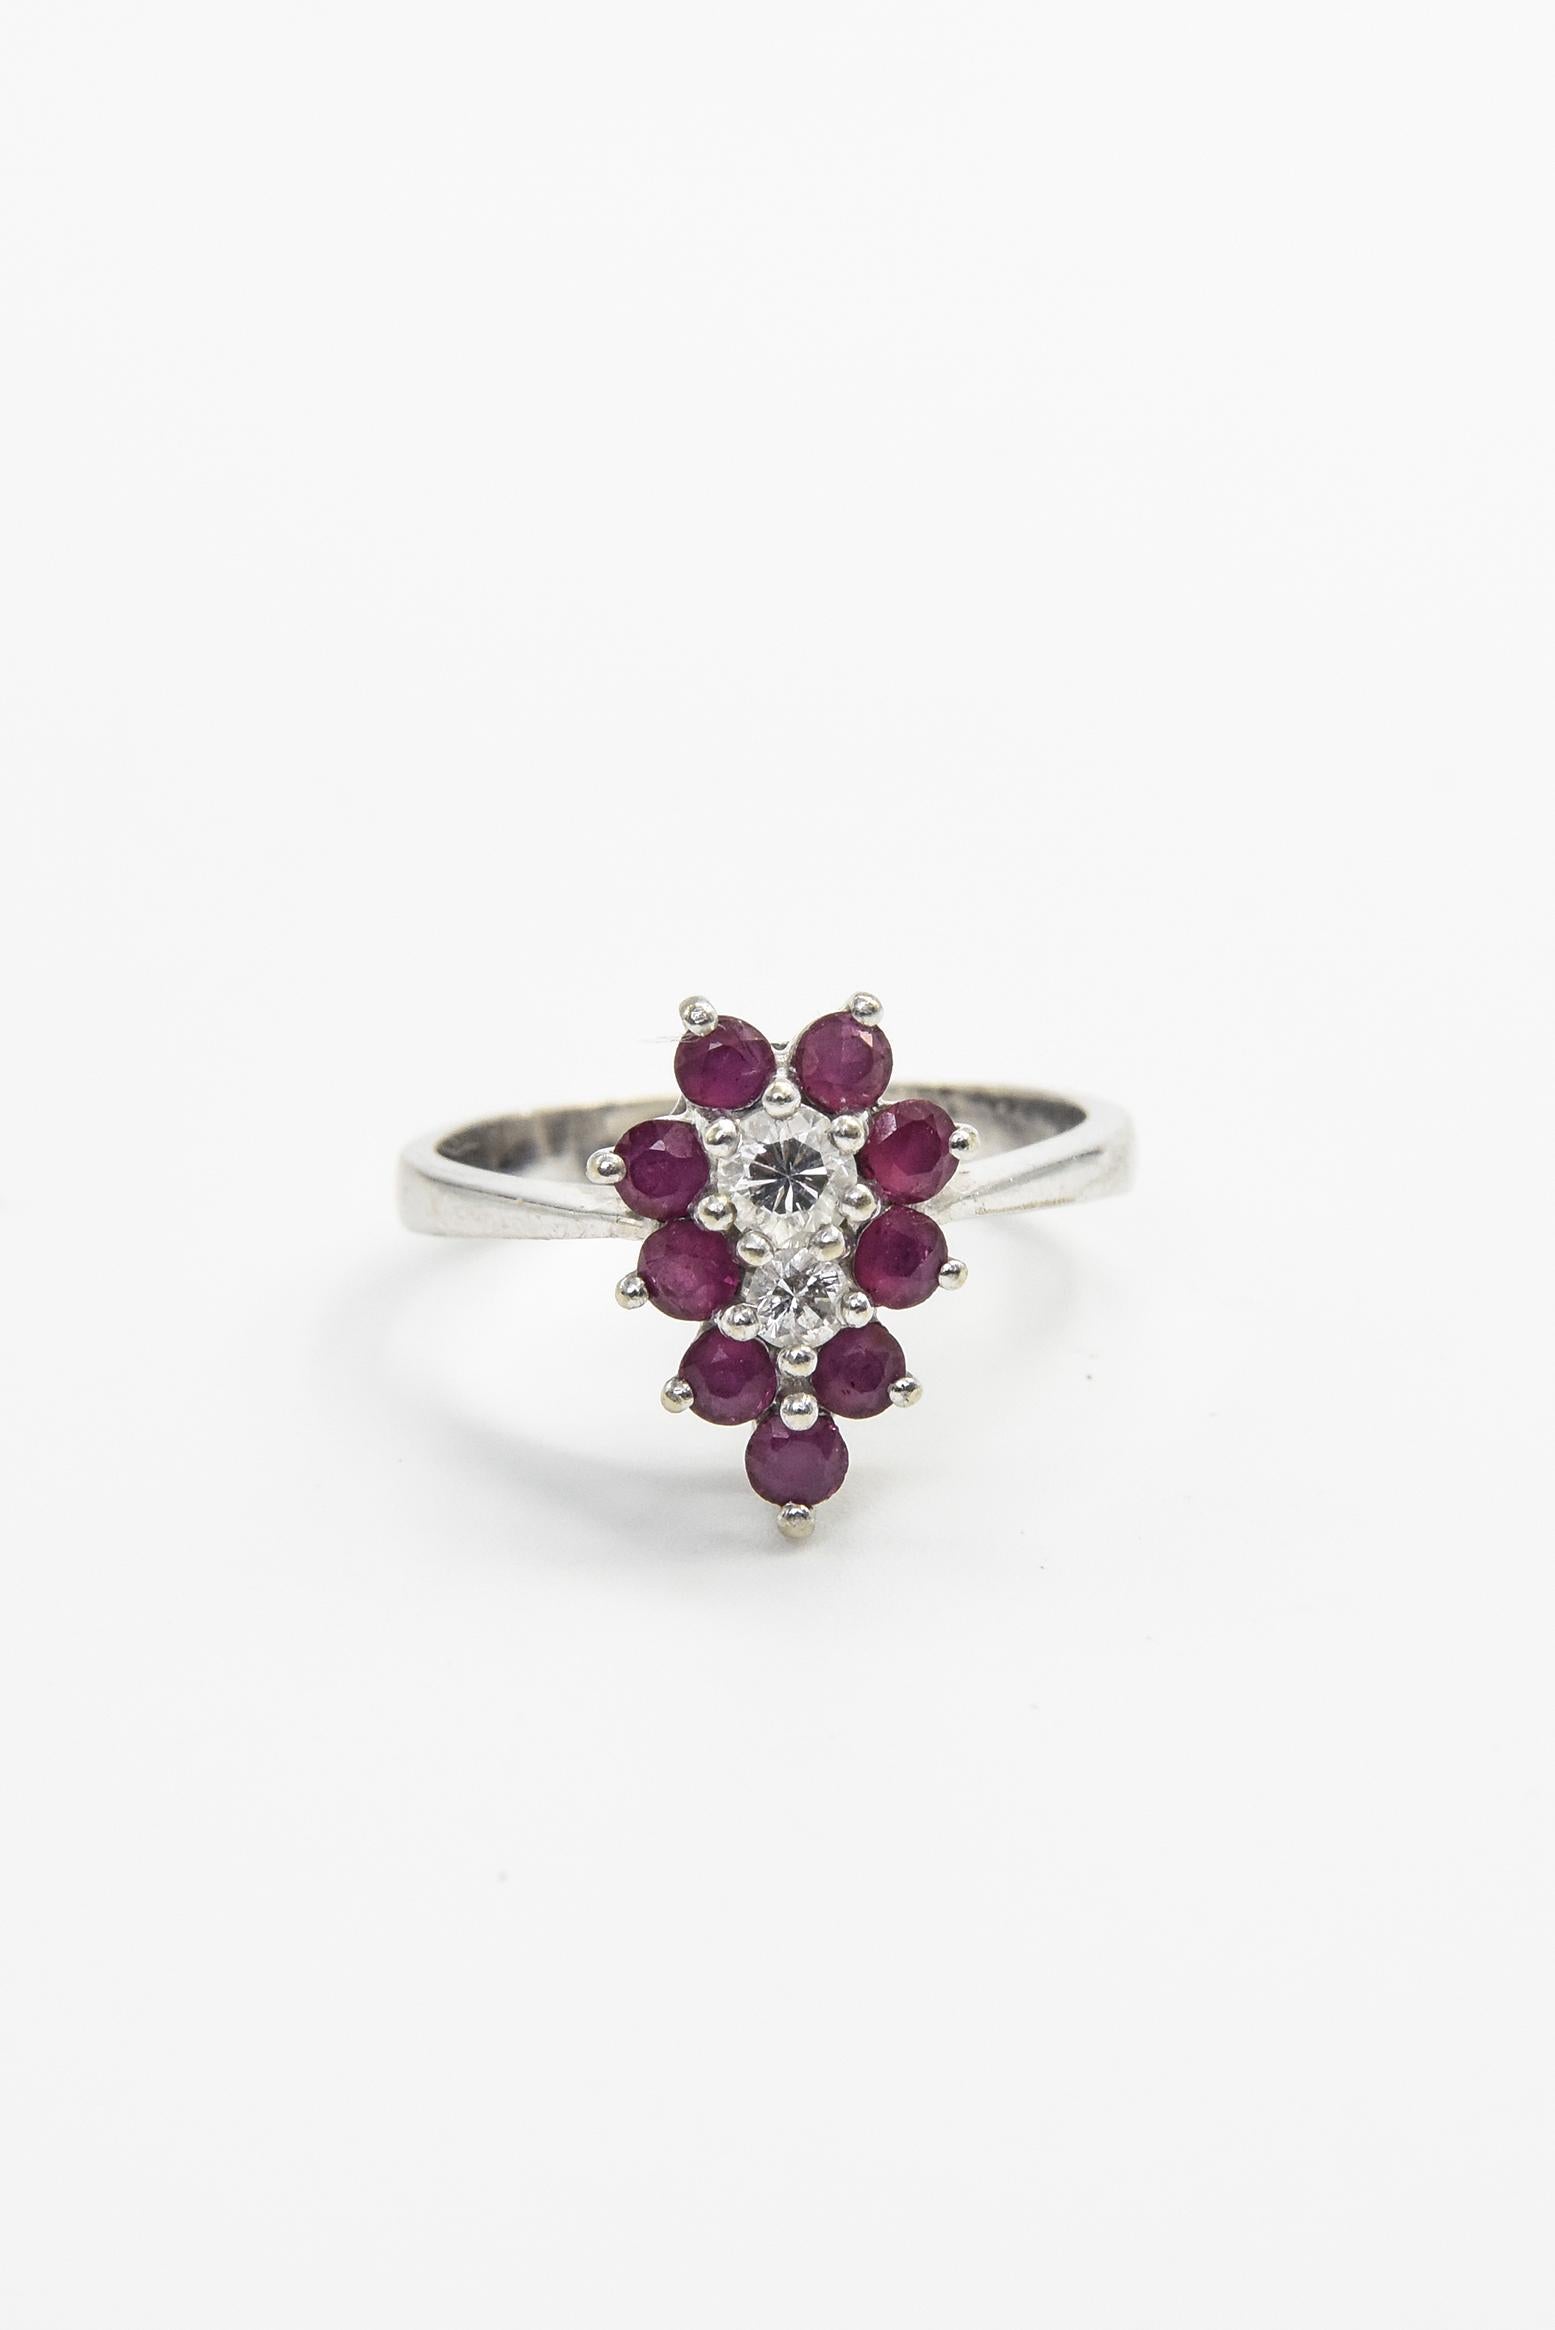 Diamond and Ruby Pear Shaped Cluster White Gold Ring For Sale 1